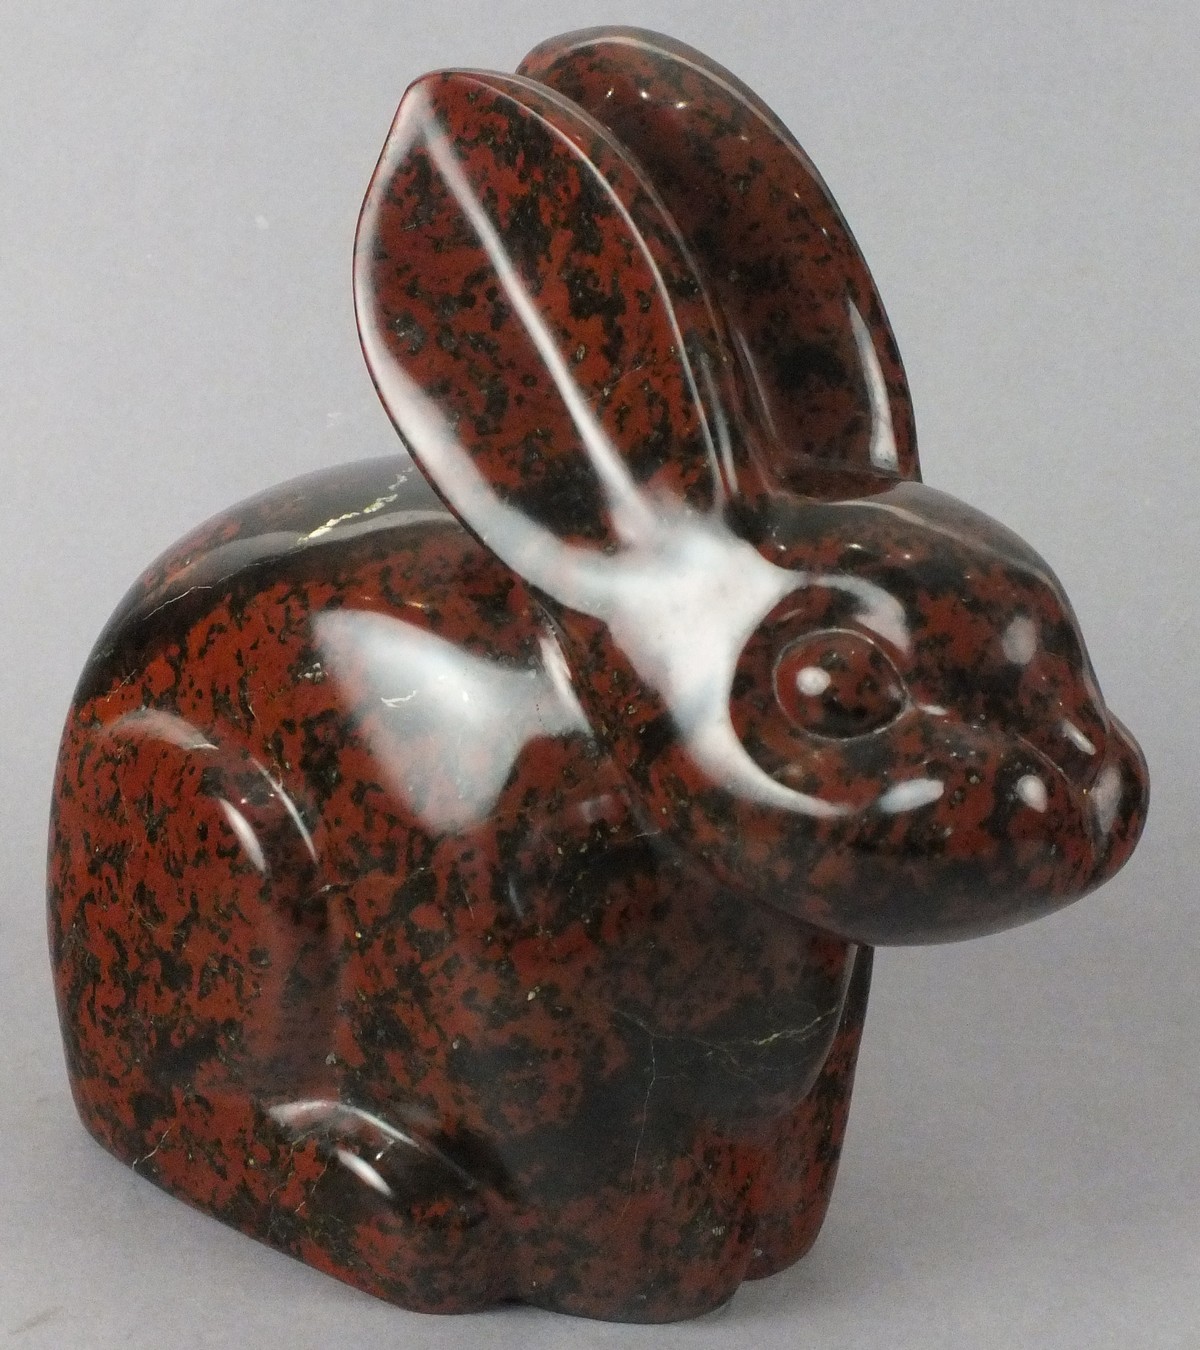 Lawrence MURLEY (British b. 1962) Rabbit VII, Sculpture in Serpentine, Signed with initials and